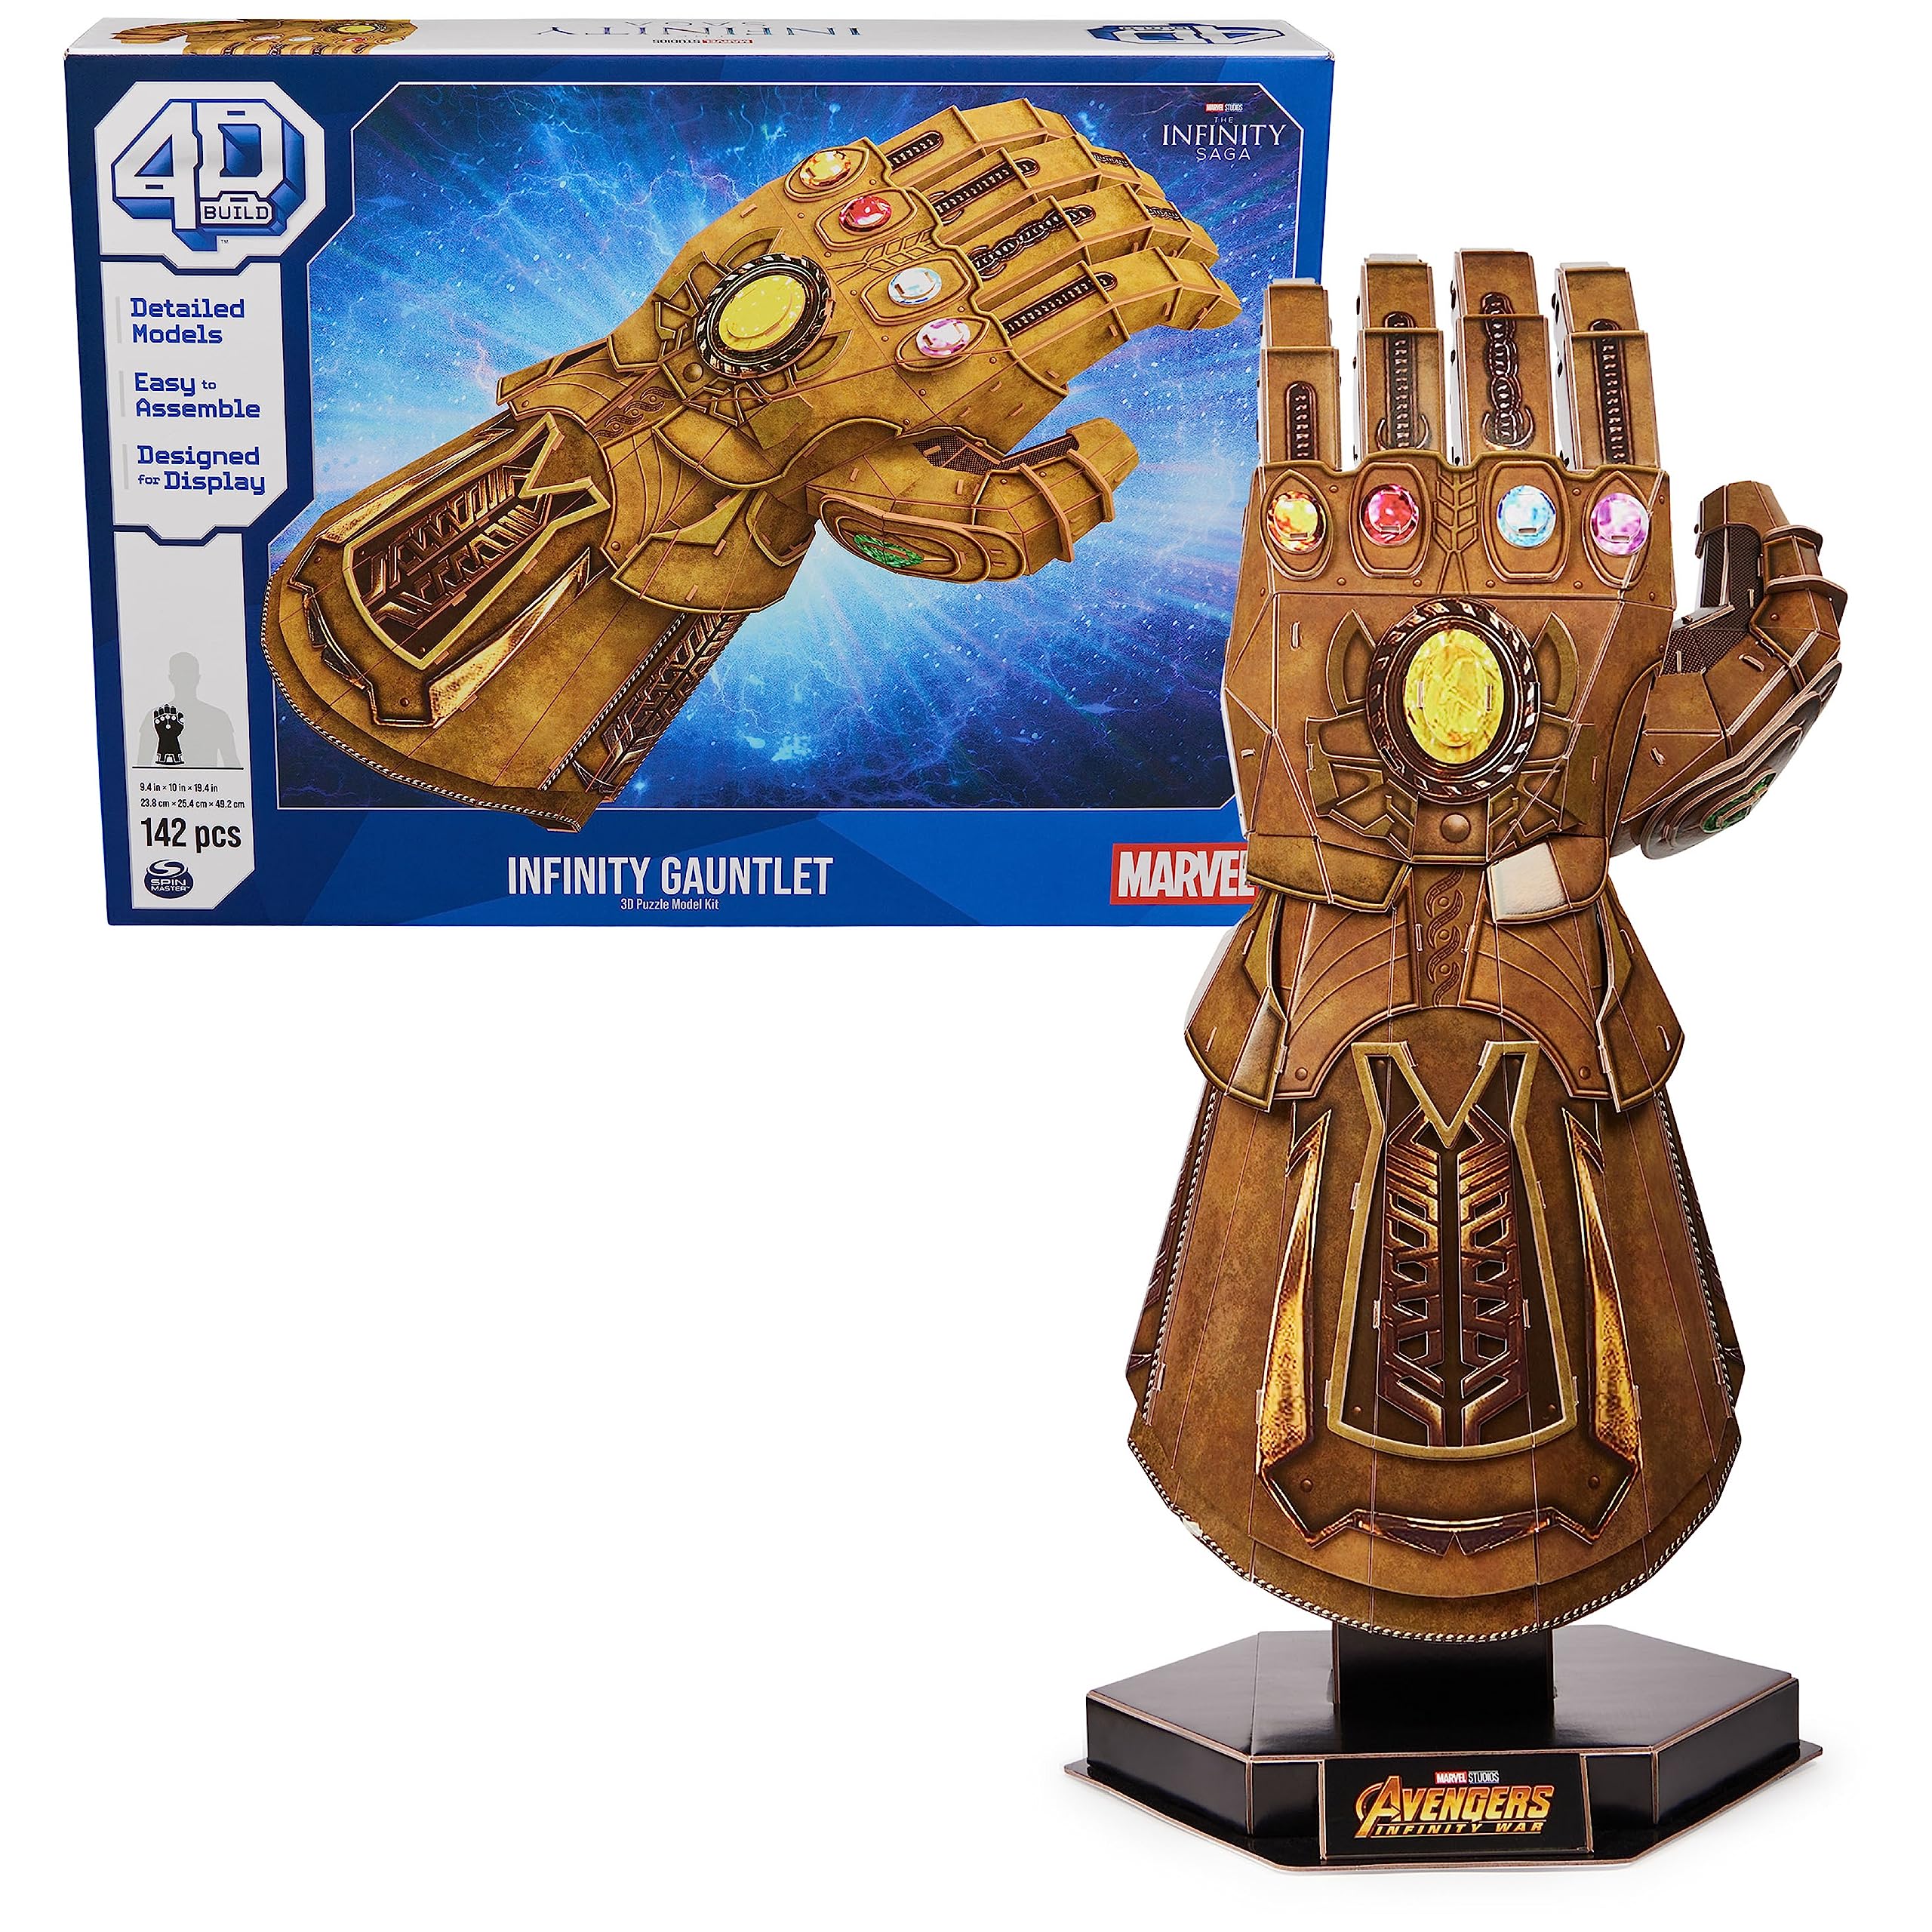 4D Puzzles, Marvel Infinity Gauntlet 3D Puzzle Model Kit with Stand 142 Pcs | Thanos Desk Decor | Building Toys | 3D Puzzles for Adults & Teens 12+